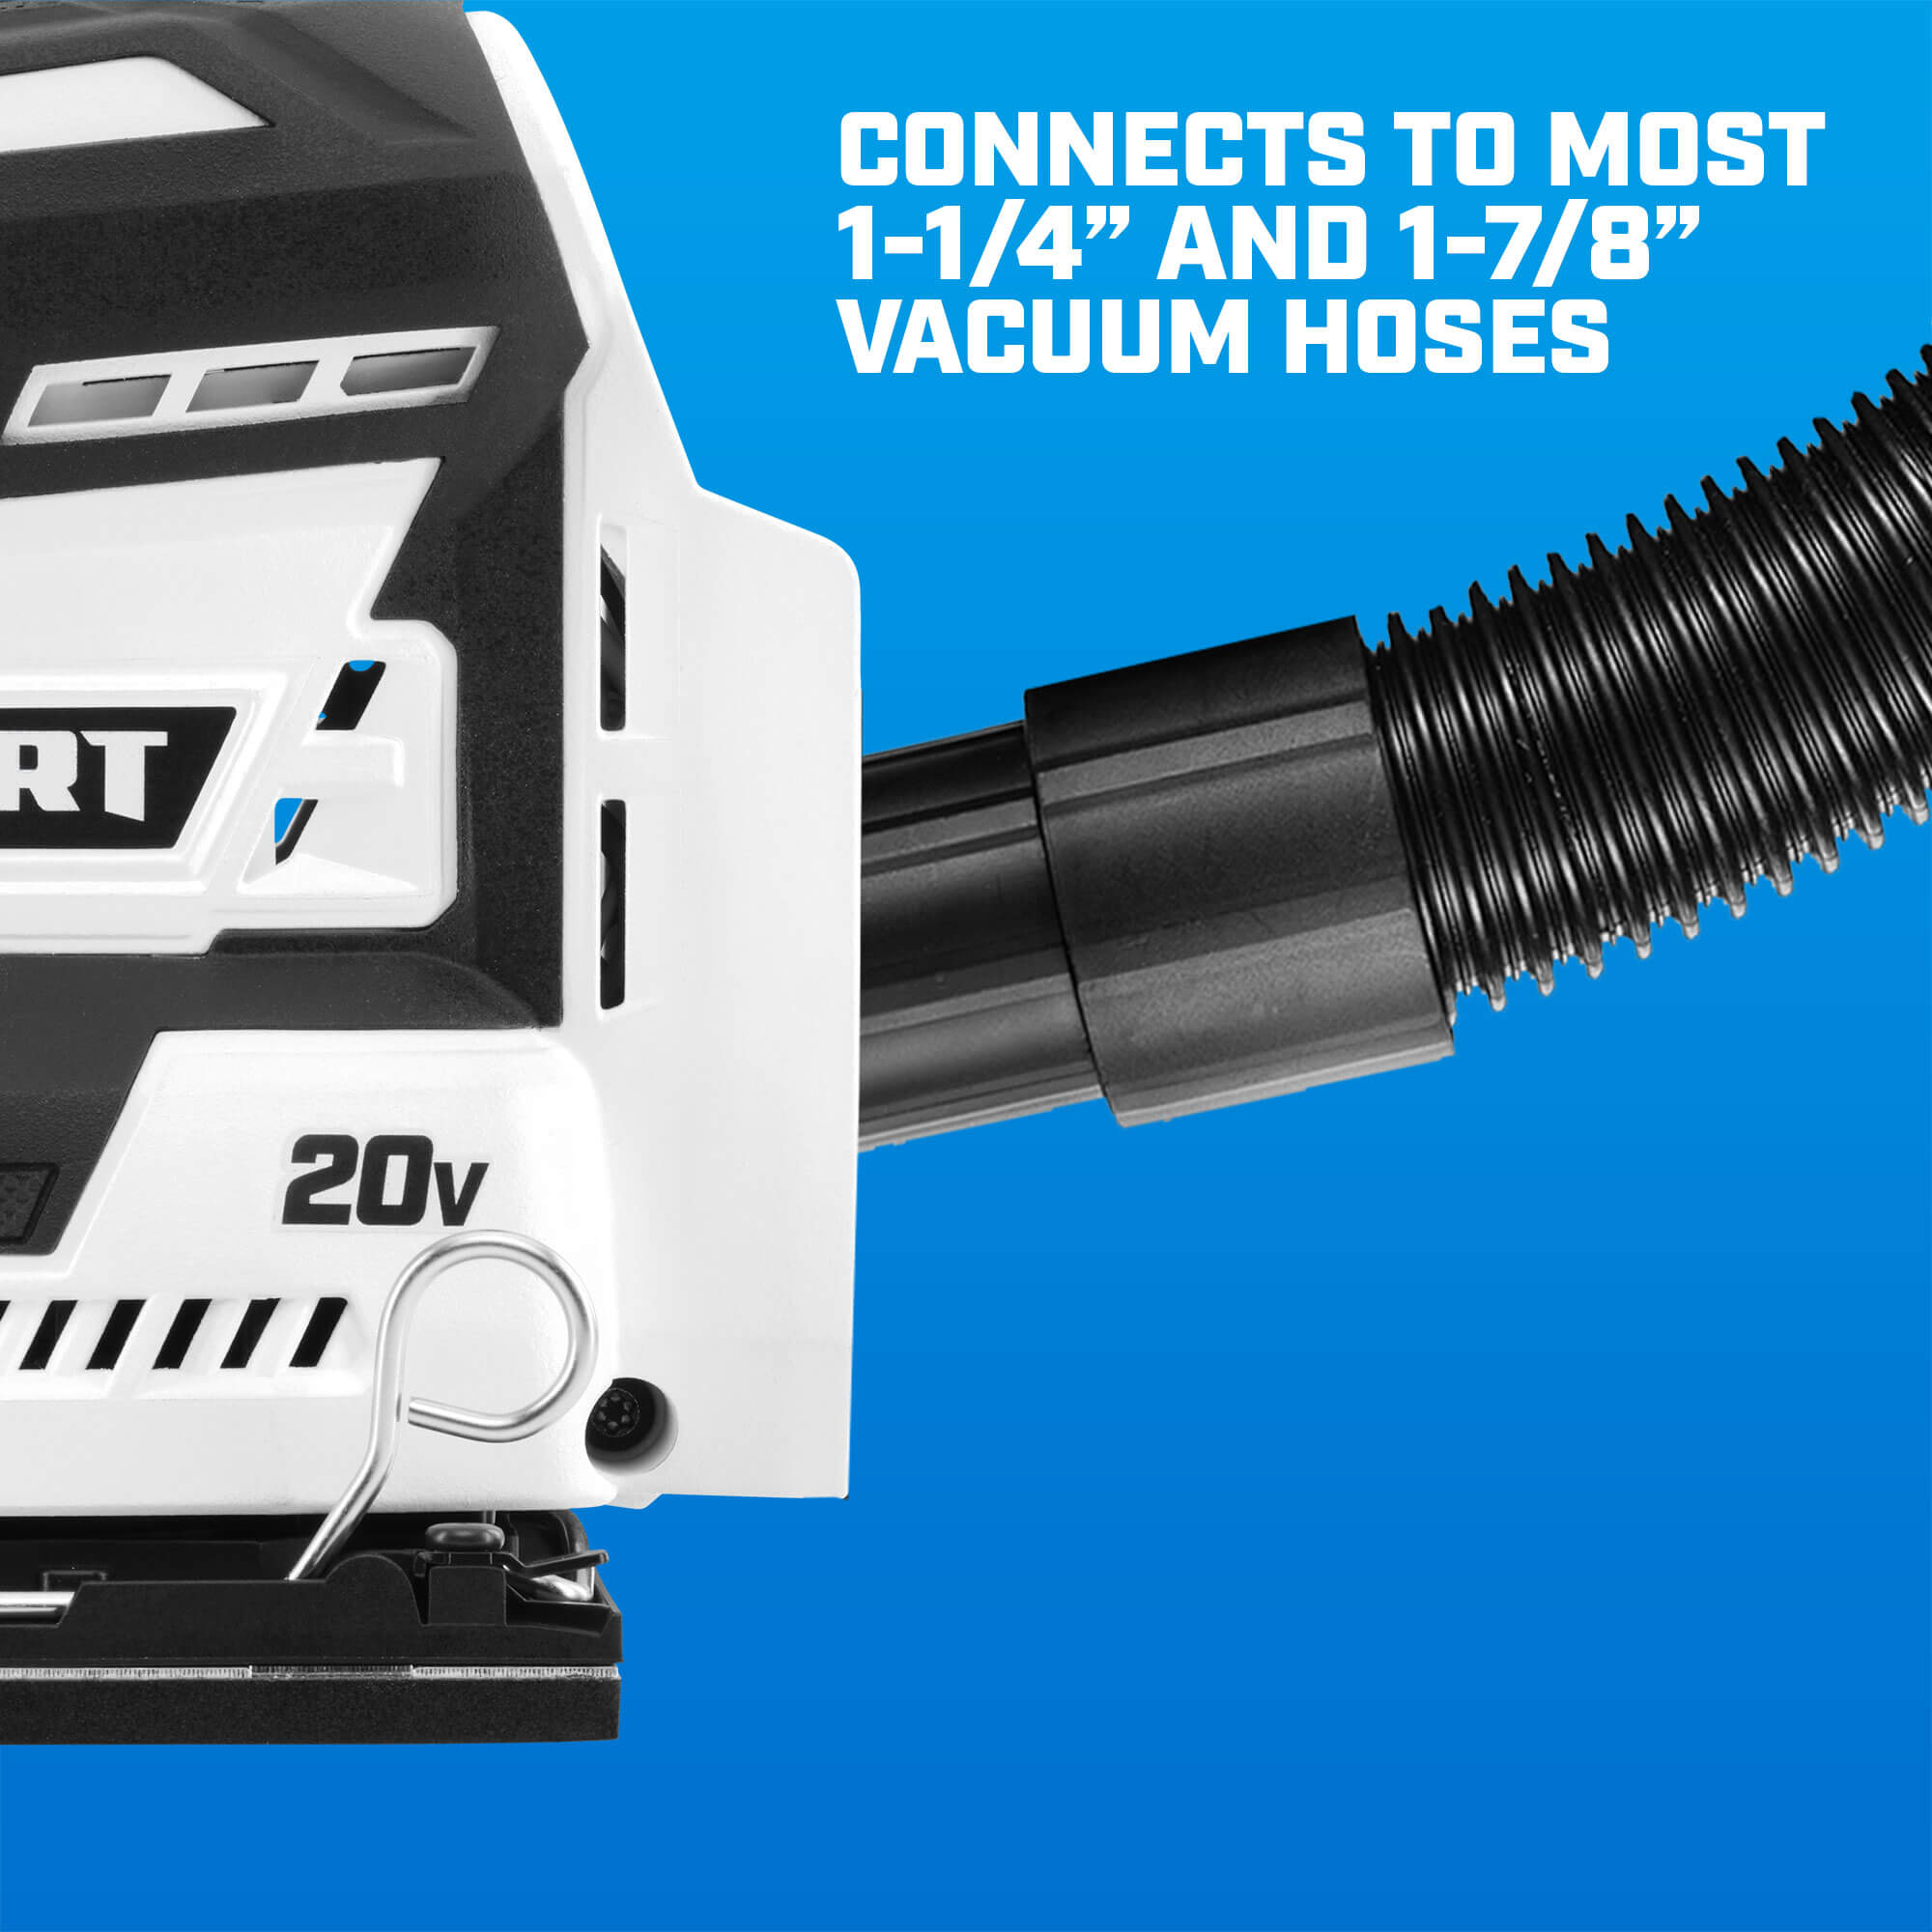 connects to most 1-1/4" and 1-7/8" vacuum hoses